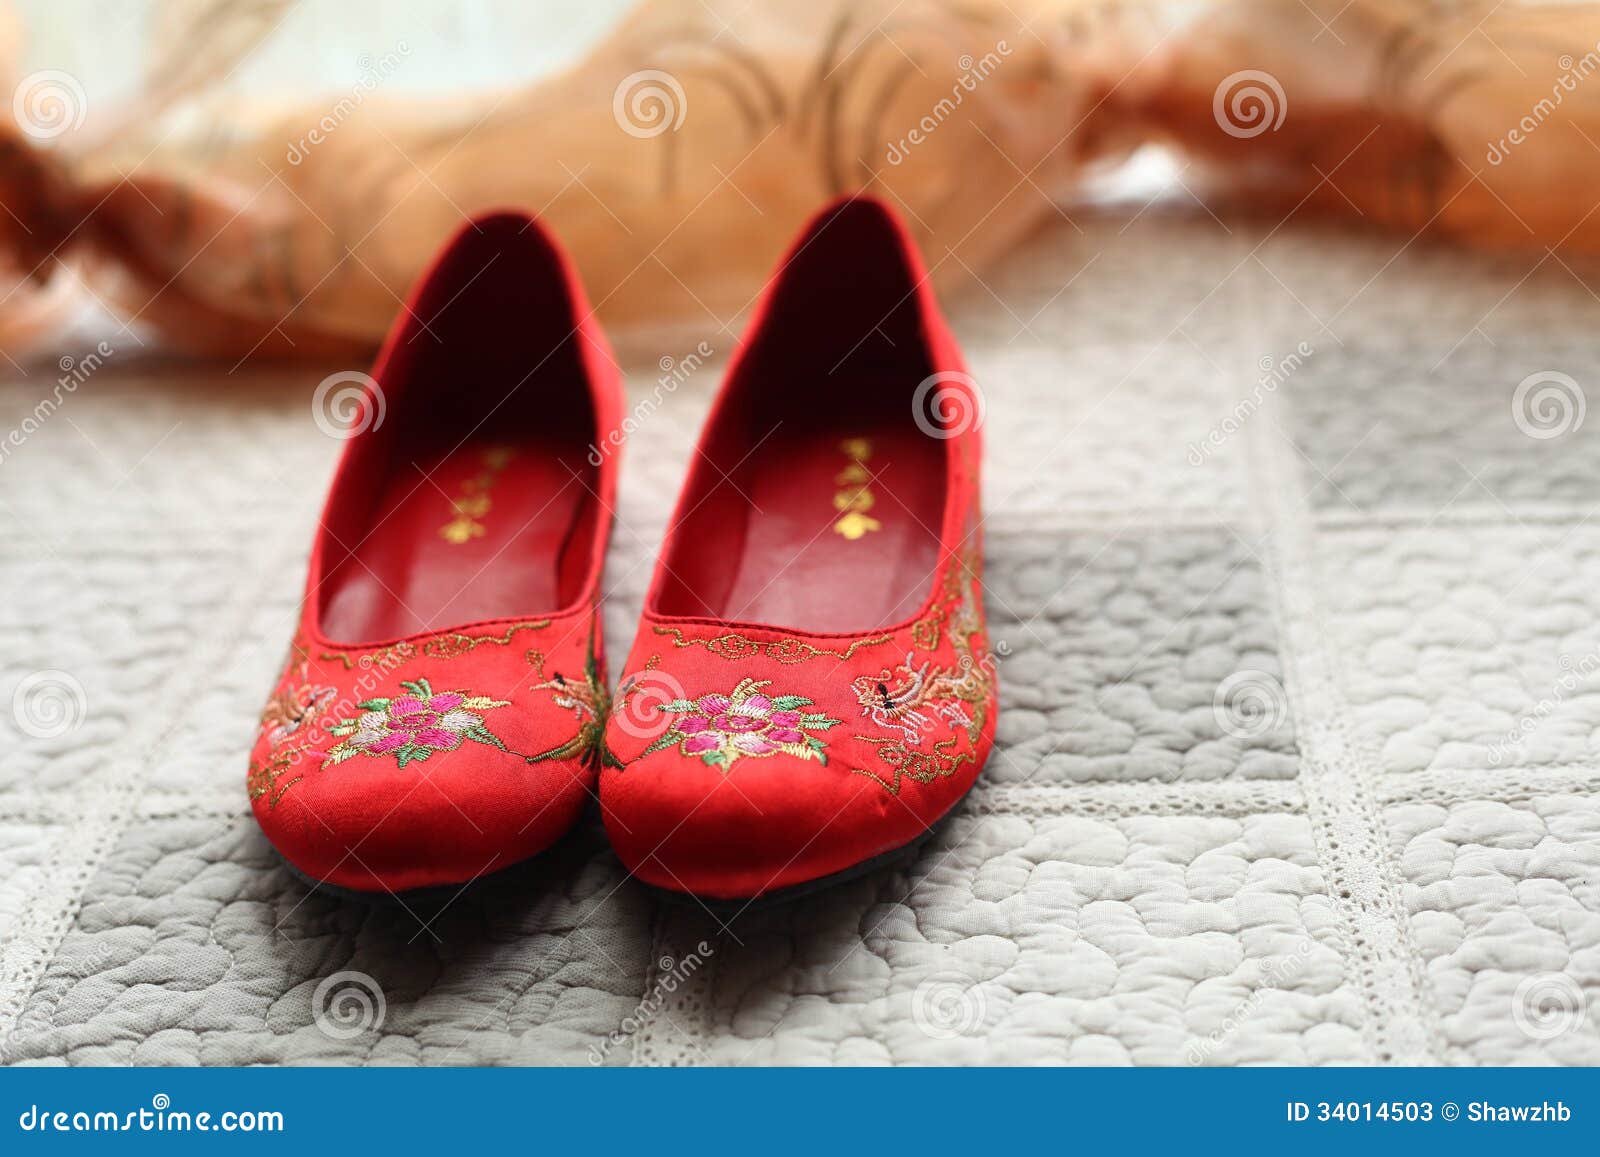 chinese wedding shoes red china 34014503